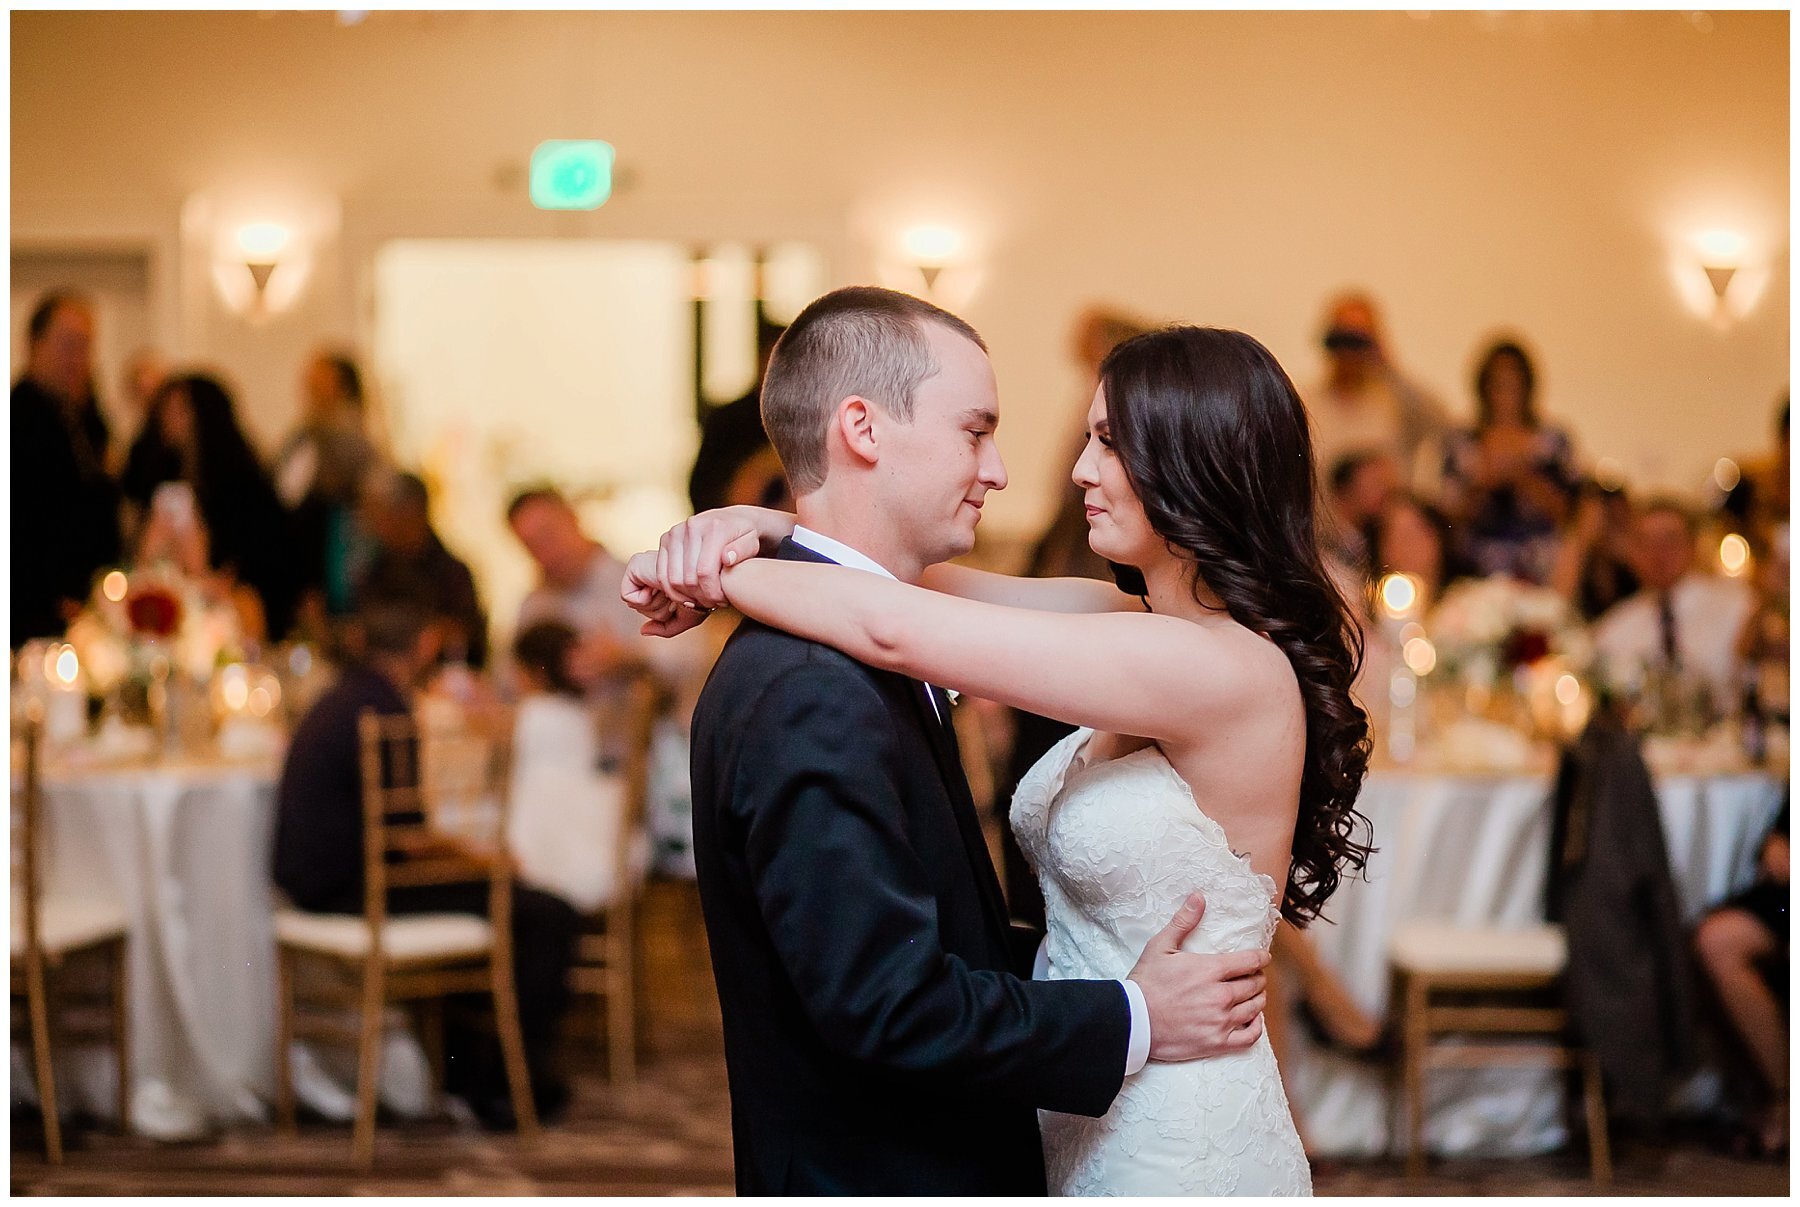  bride and groom dancing together for the first time as husband and wife 